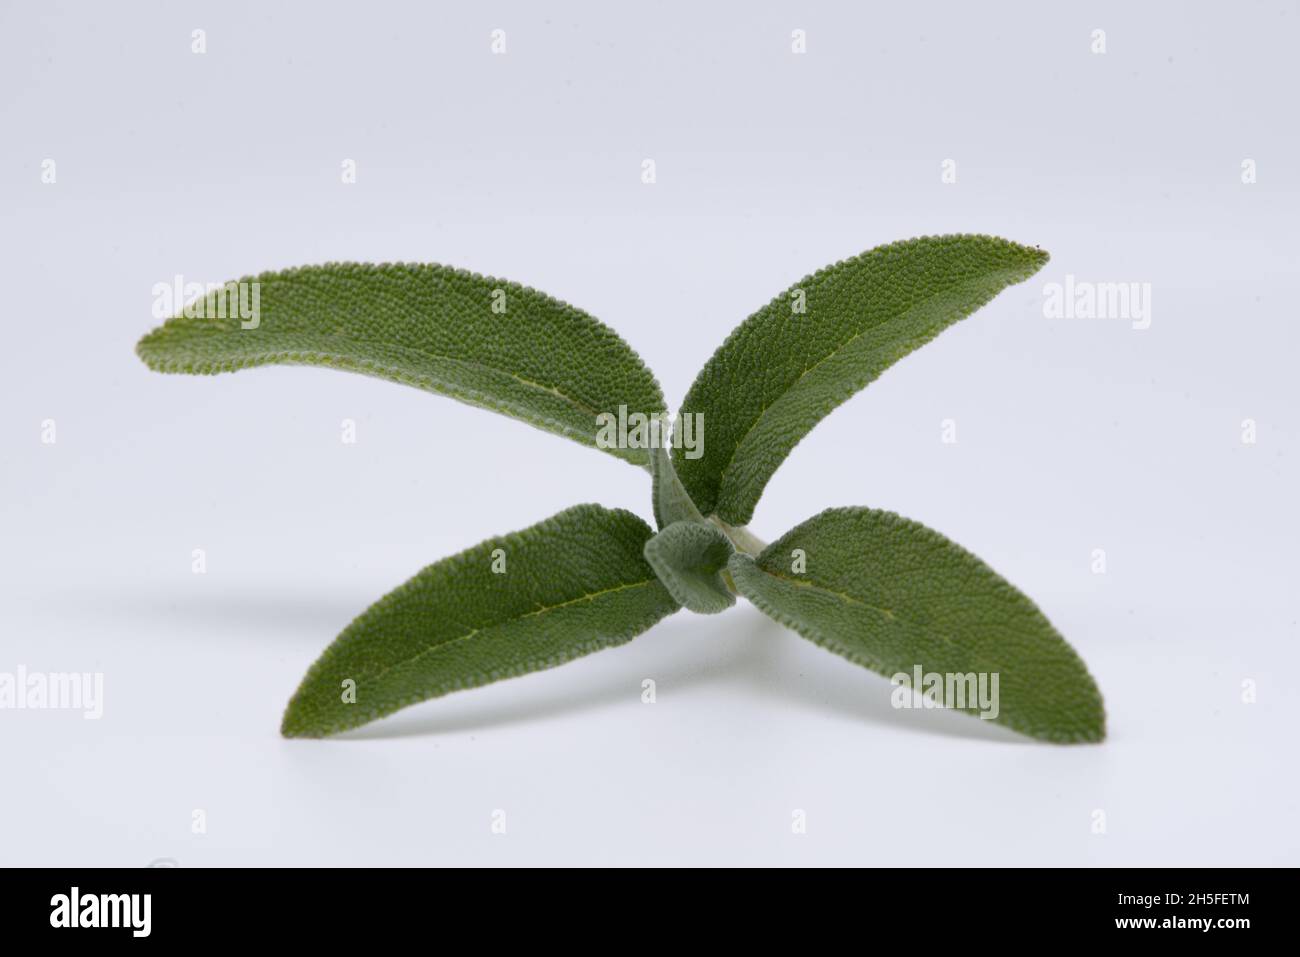 Sprig of common sage, aromatic herbaceous perennial plant, Lamiaceae family. Stock Photo